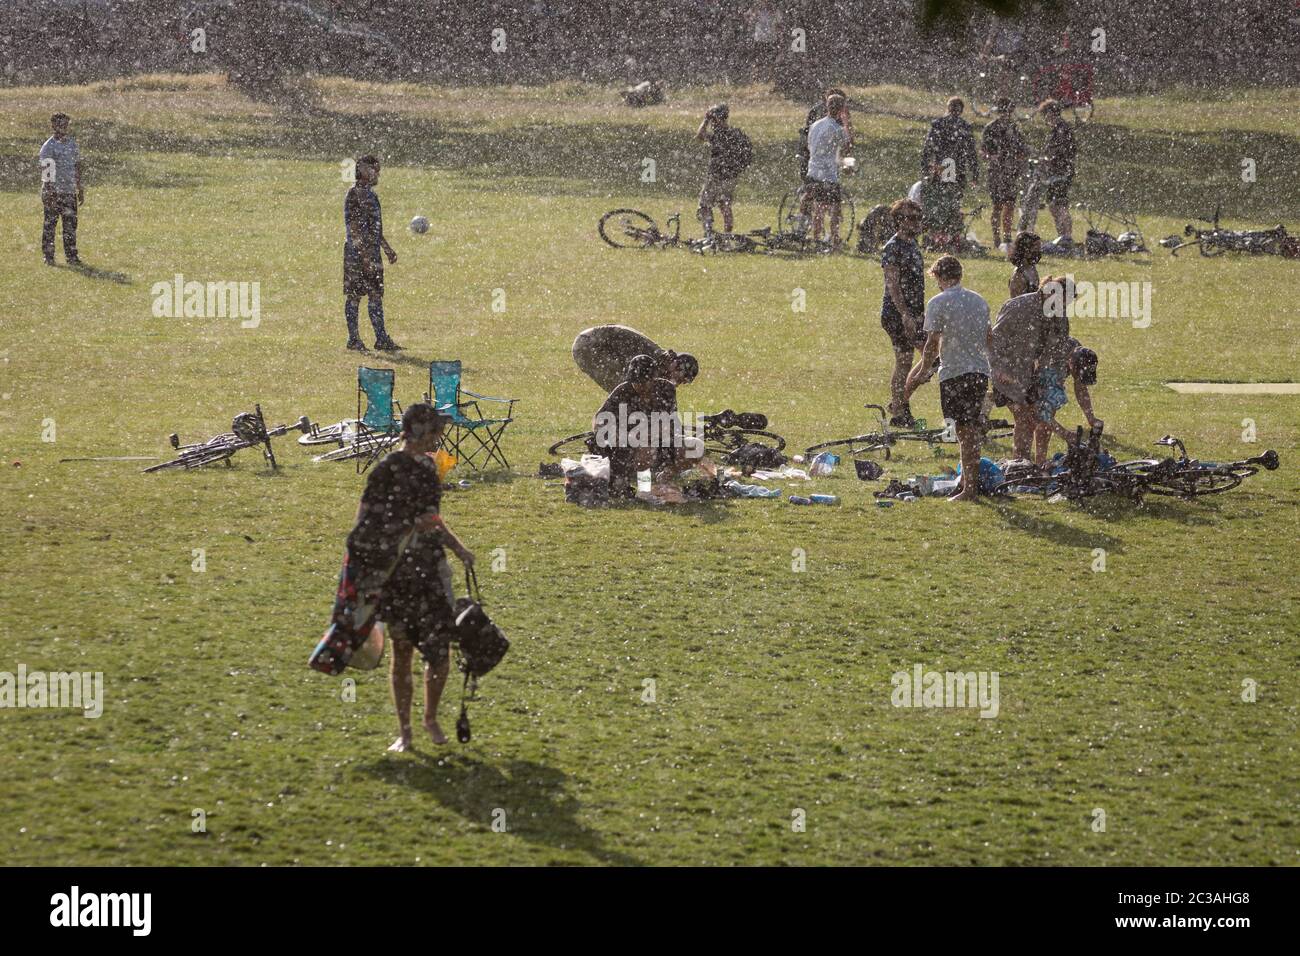 After an afternoon of sunshine and warm temperatures during the continuing UK Coronavirus lockdown, a sudden and torrential downpour of rain catches park users by surprise, in Ruskin Park, a public green space in Lambeth, on 14th June 2020, in London, England. The current UK Covid-19 death toll now stands at 41,662, an increase over the last 24 hours of 181, although Prime Minister Boris Johnson is coming under pressure to review the case for a reduction of the 2 metre social distance rule, due to its effect on jobs and wider economy. Stock Photo